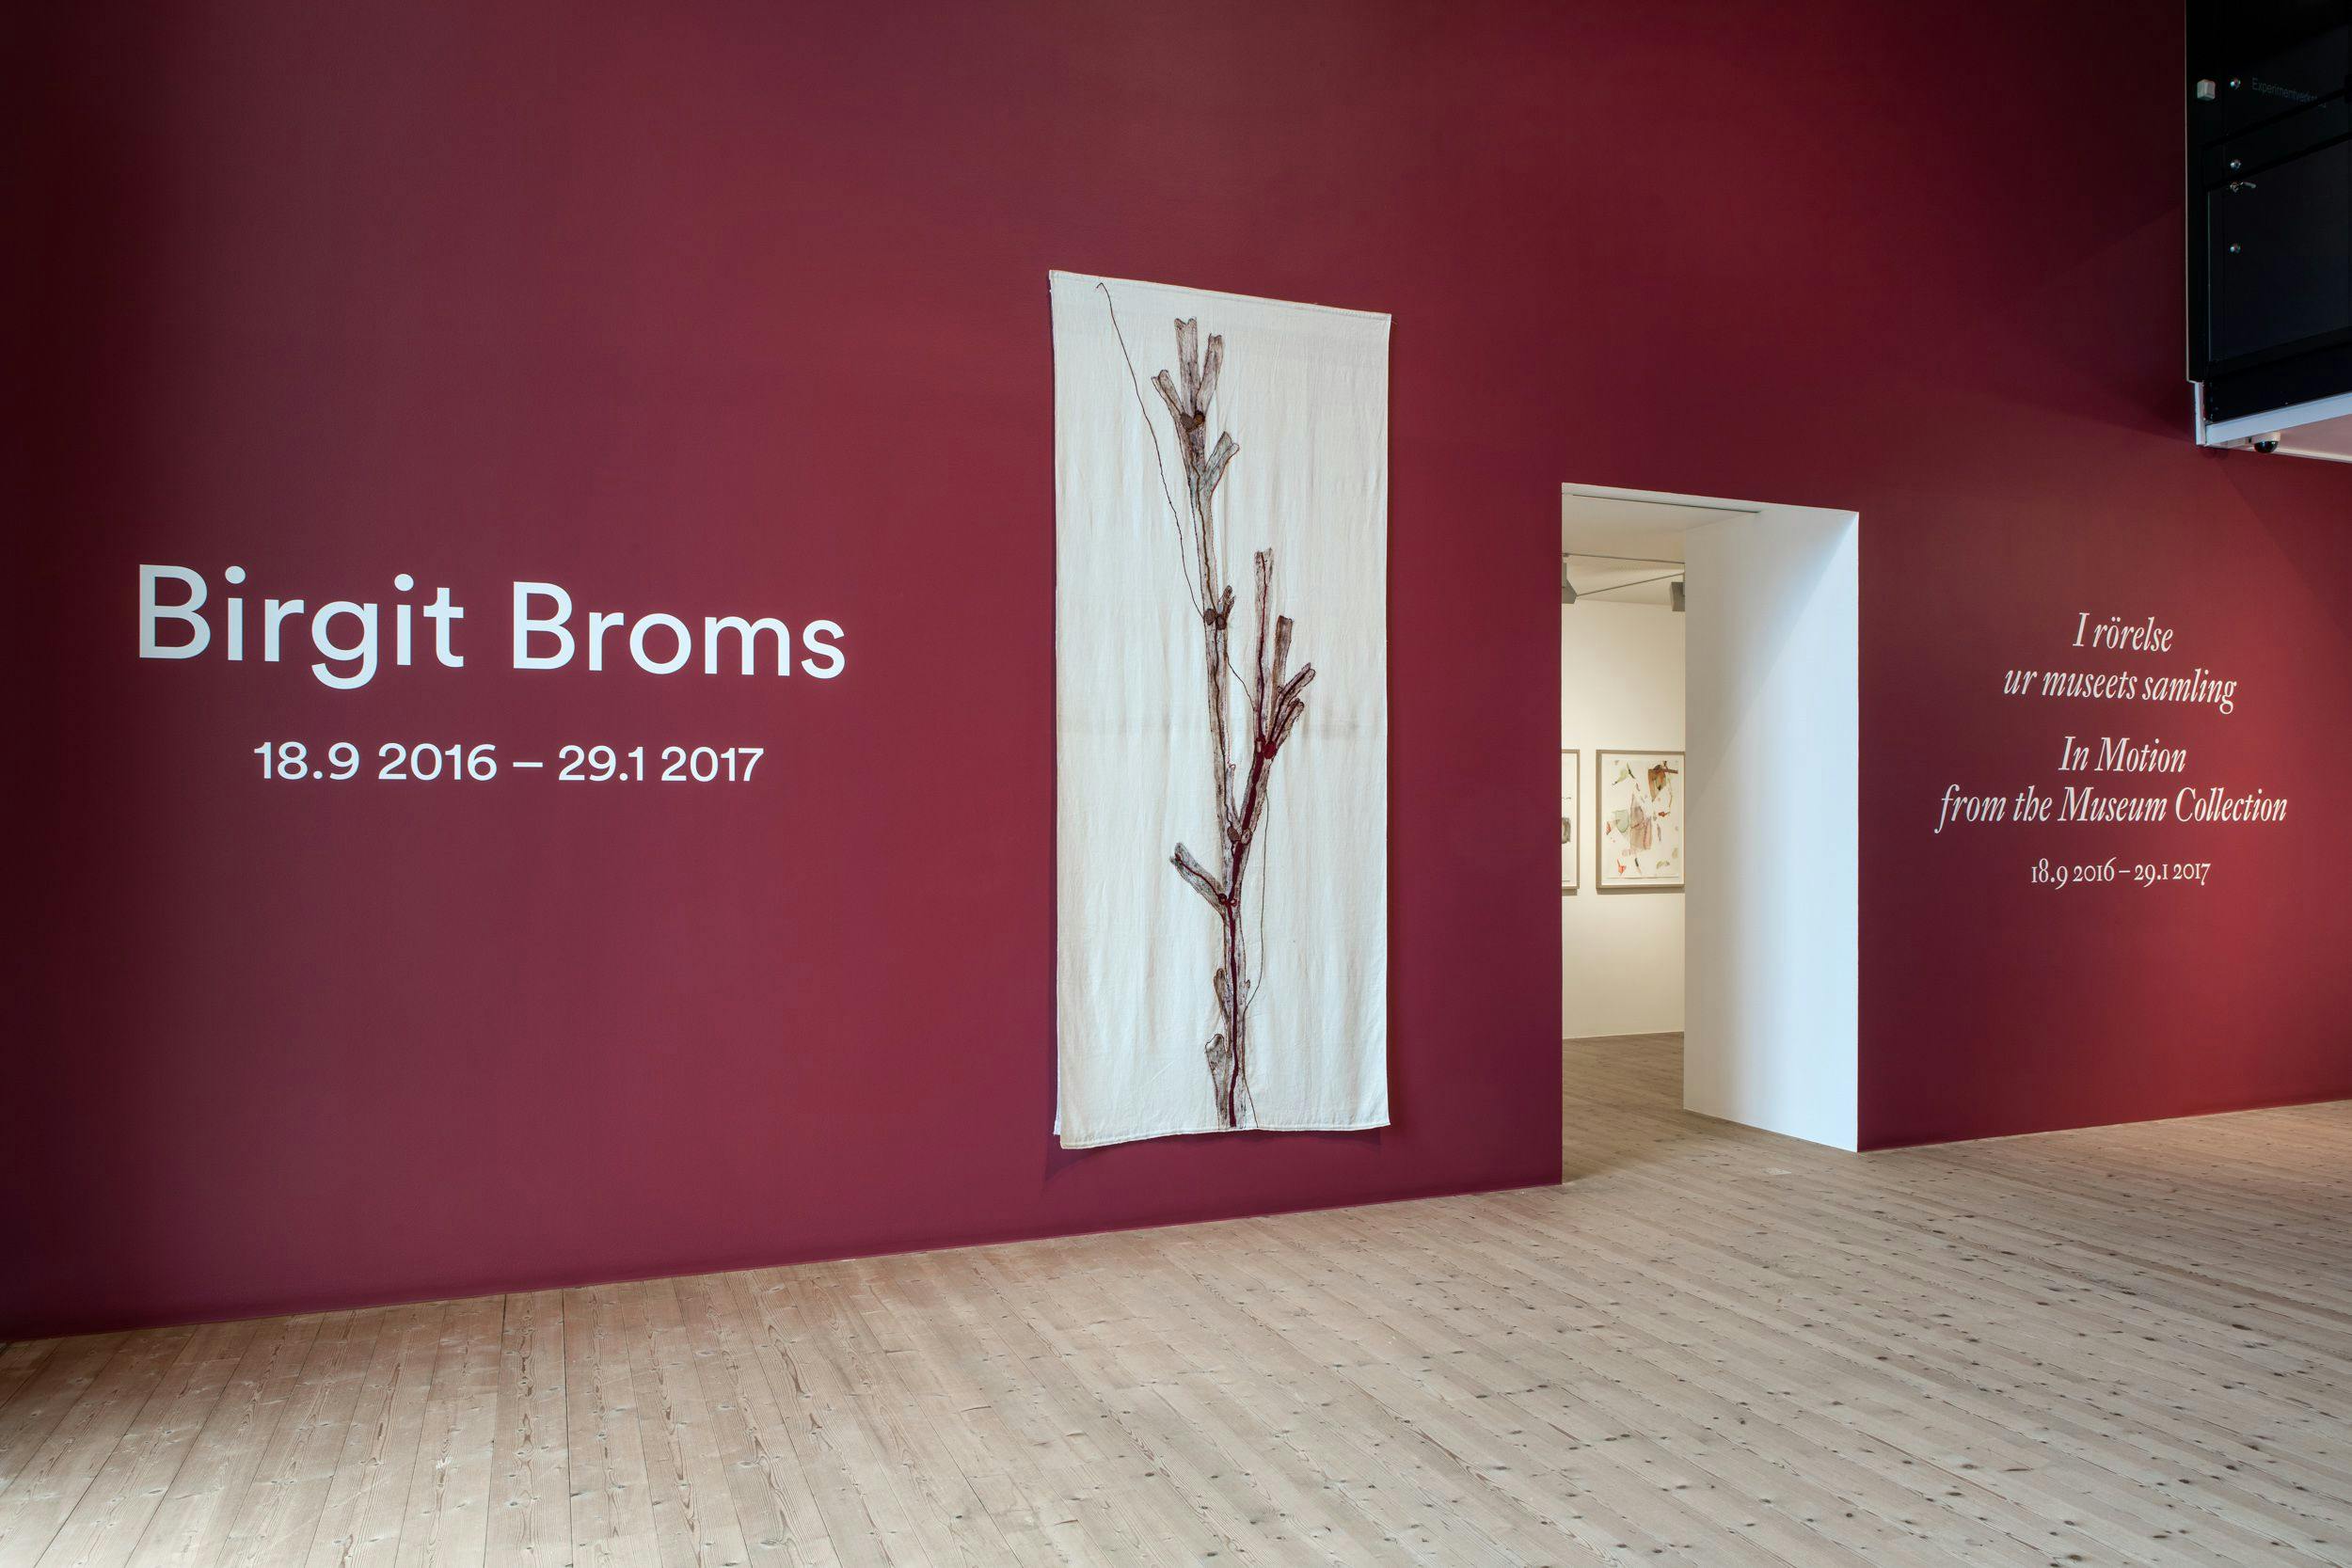 The entrance to the exhibition, a burgundy wall with white text on it, as well as a horizontal, bright textile art work.